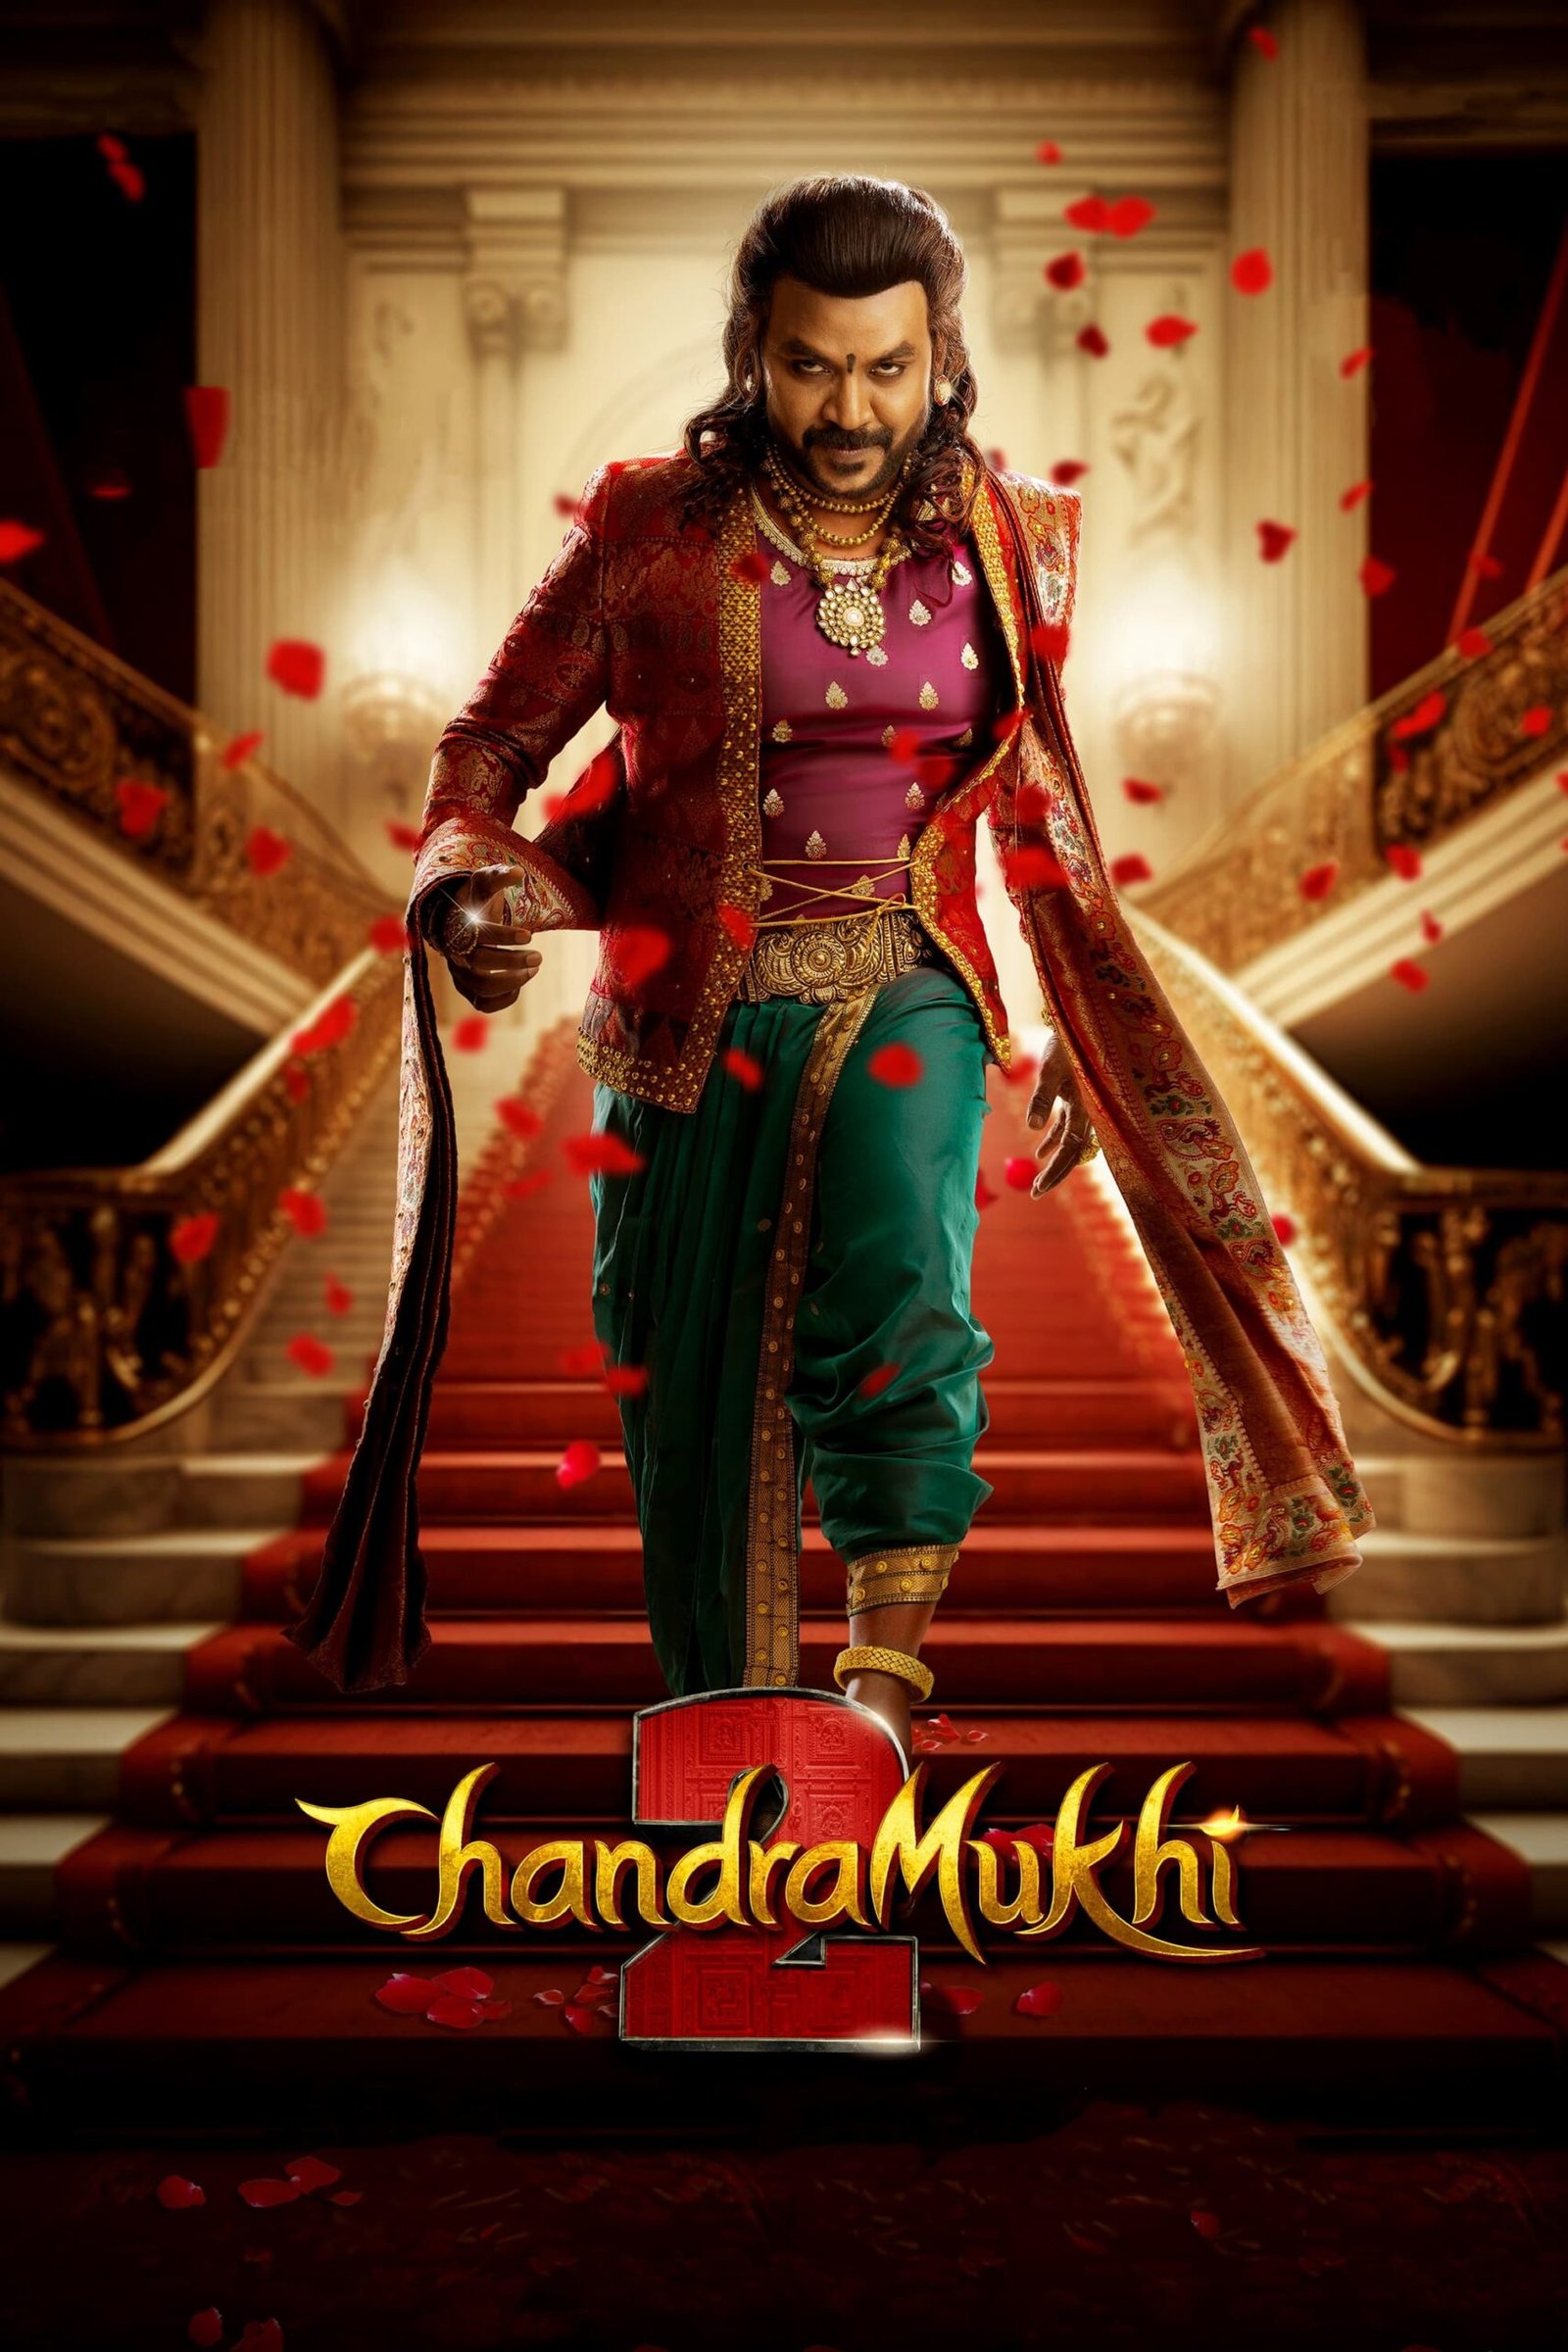 Poster for the movie "Chandramukhi 2"